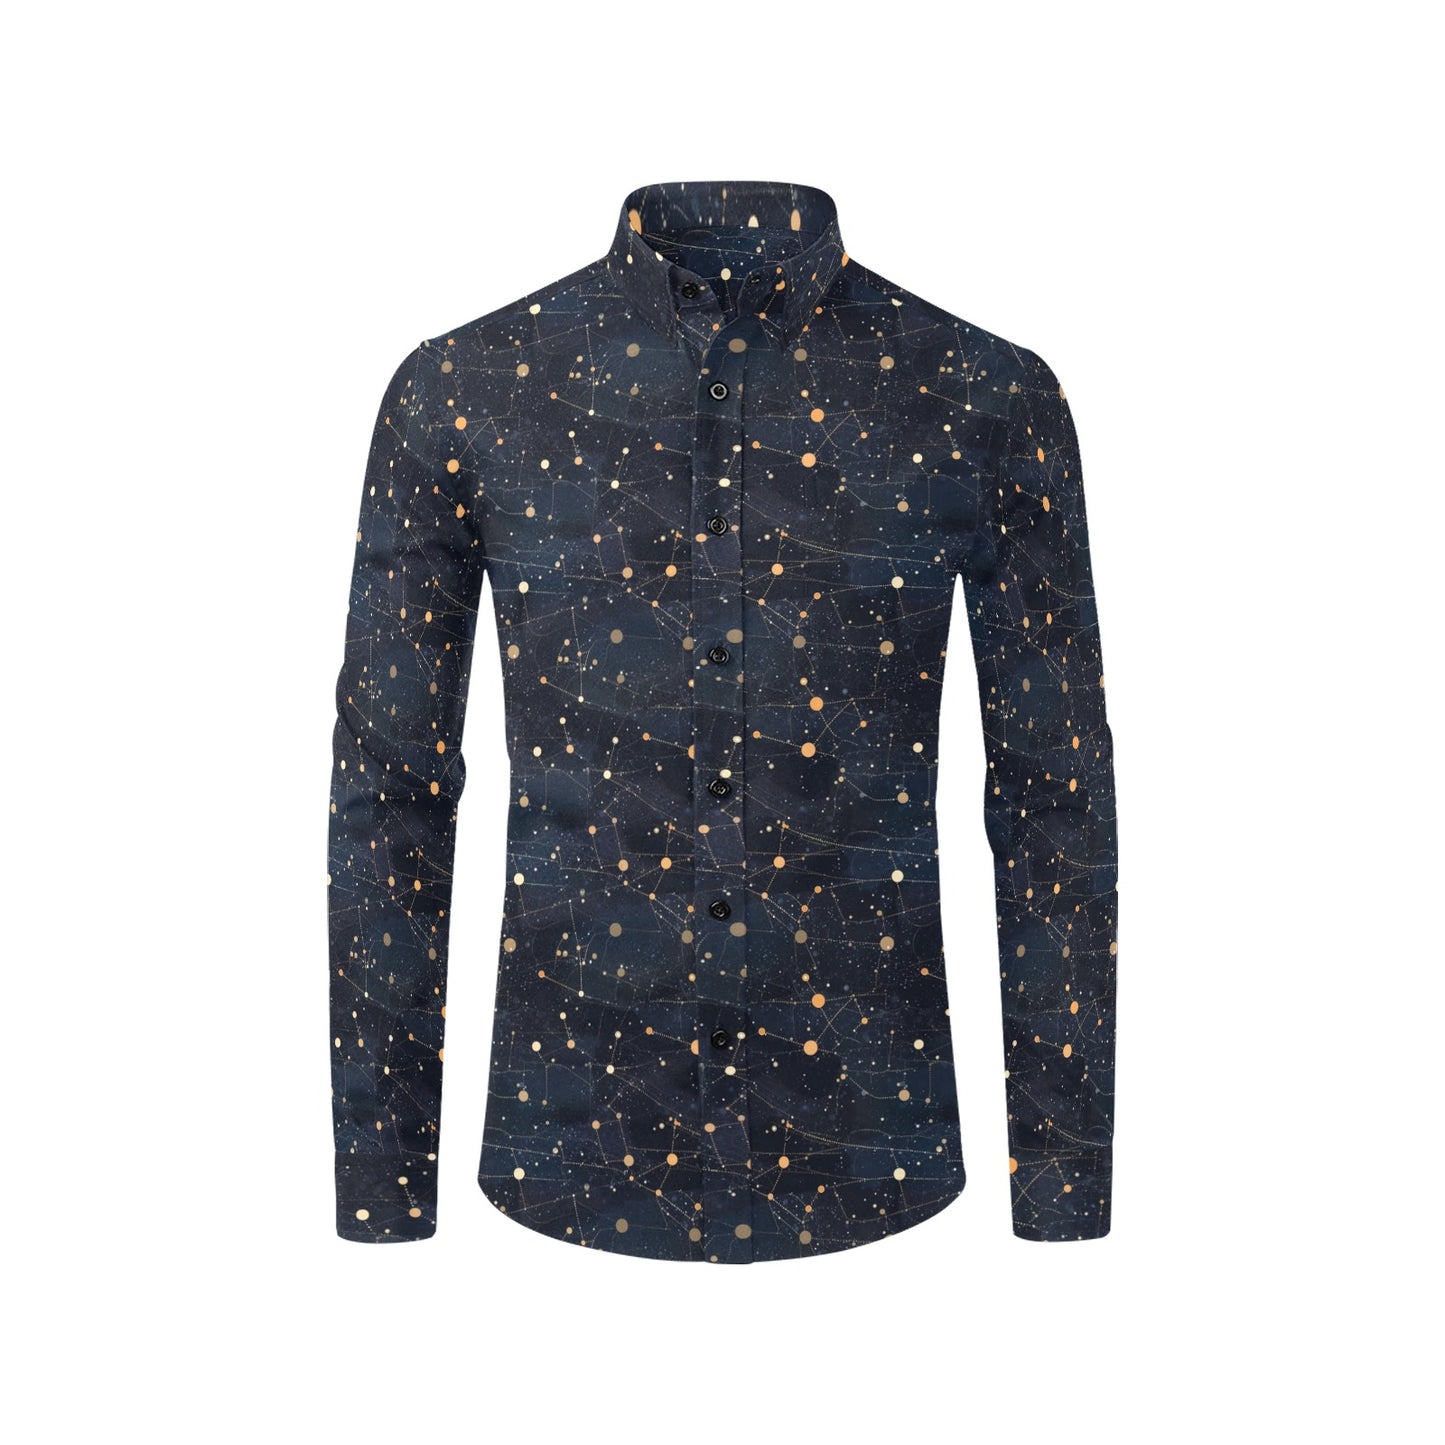 Constellation Space Long Sleeve Men Button Up Shirt, Universe Stars Print Dress Buttoned Collared Casual Dress Shirt with Chest Pocket